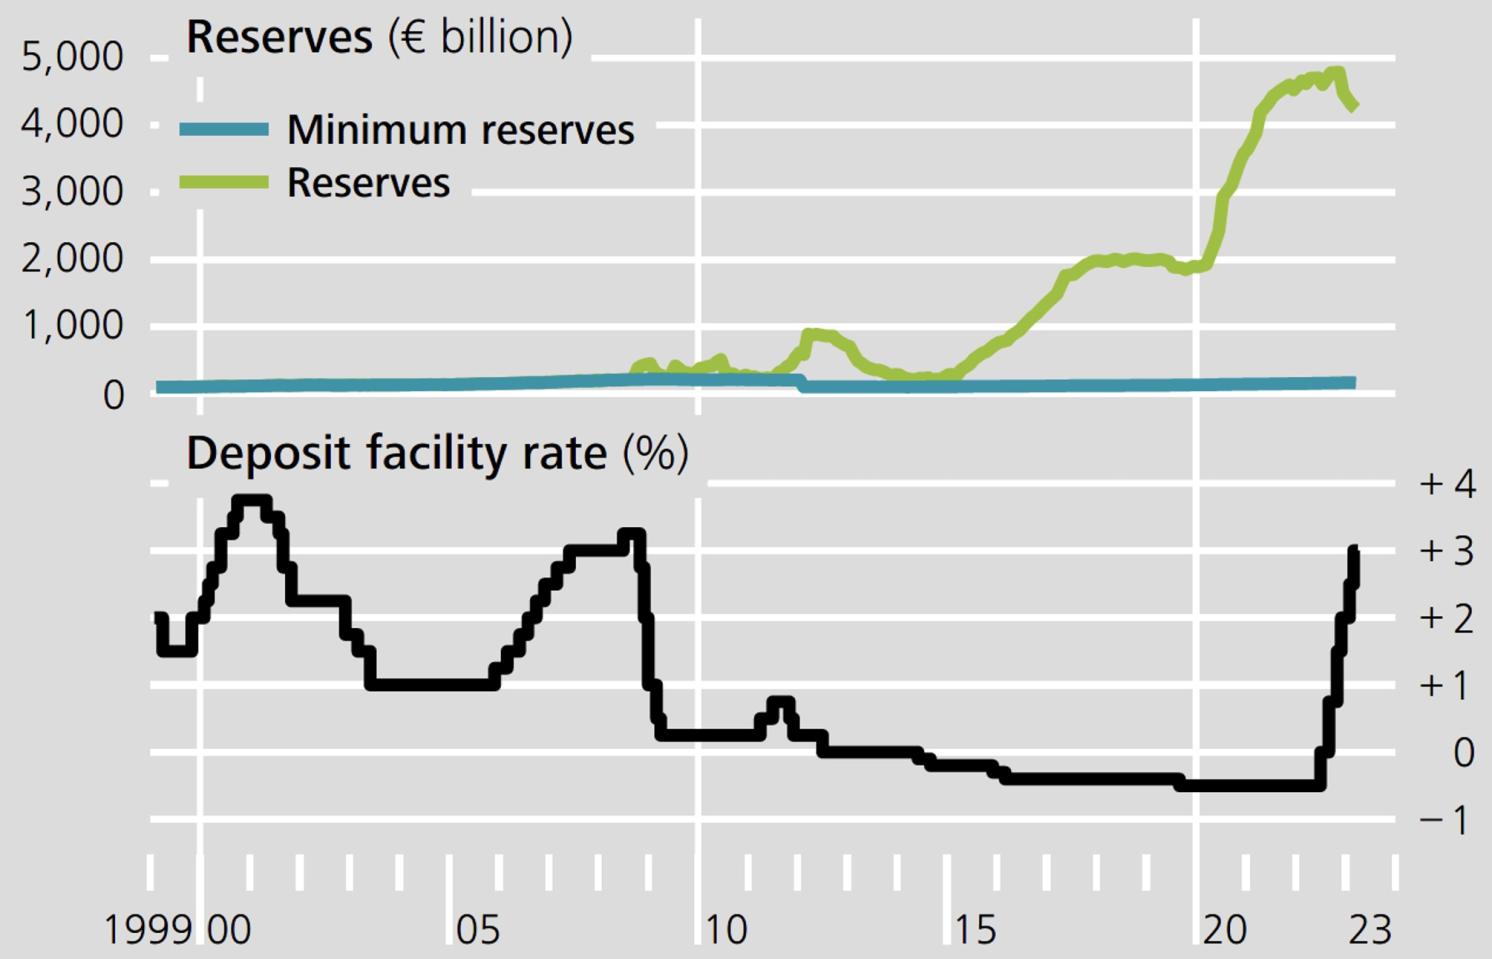 Figure 1 Central bank reserves and deposit facility rate